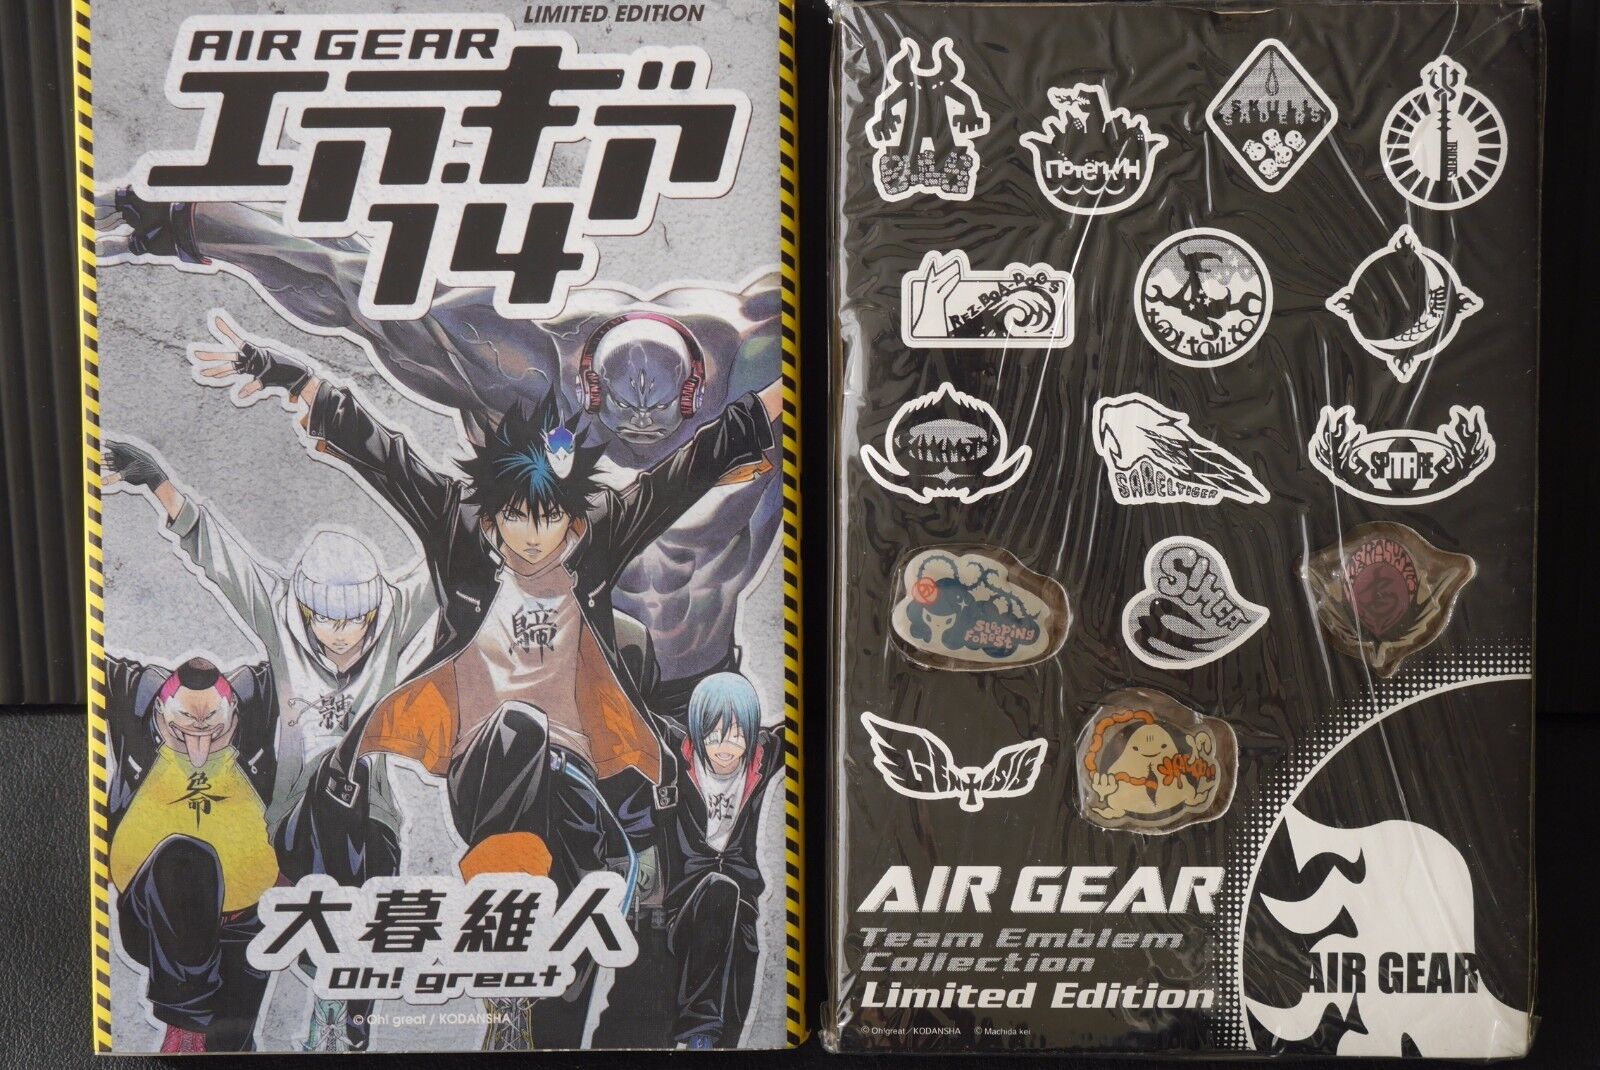 Oh Great: Air Gear vol.14 Limited Edition Manga - JAPAN